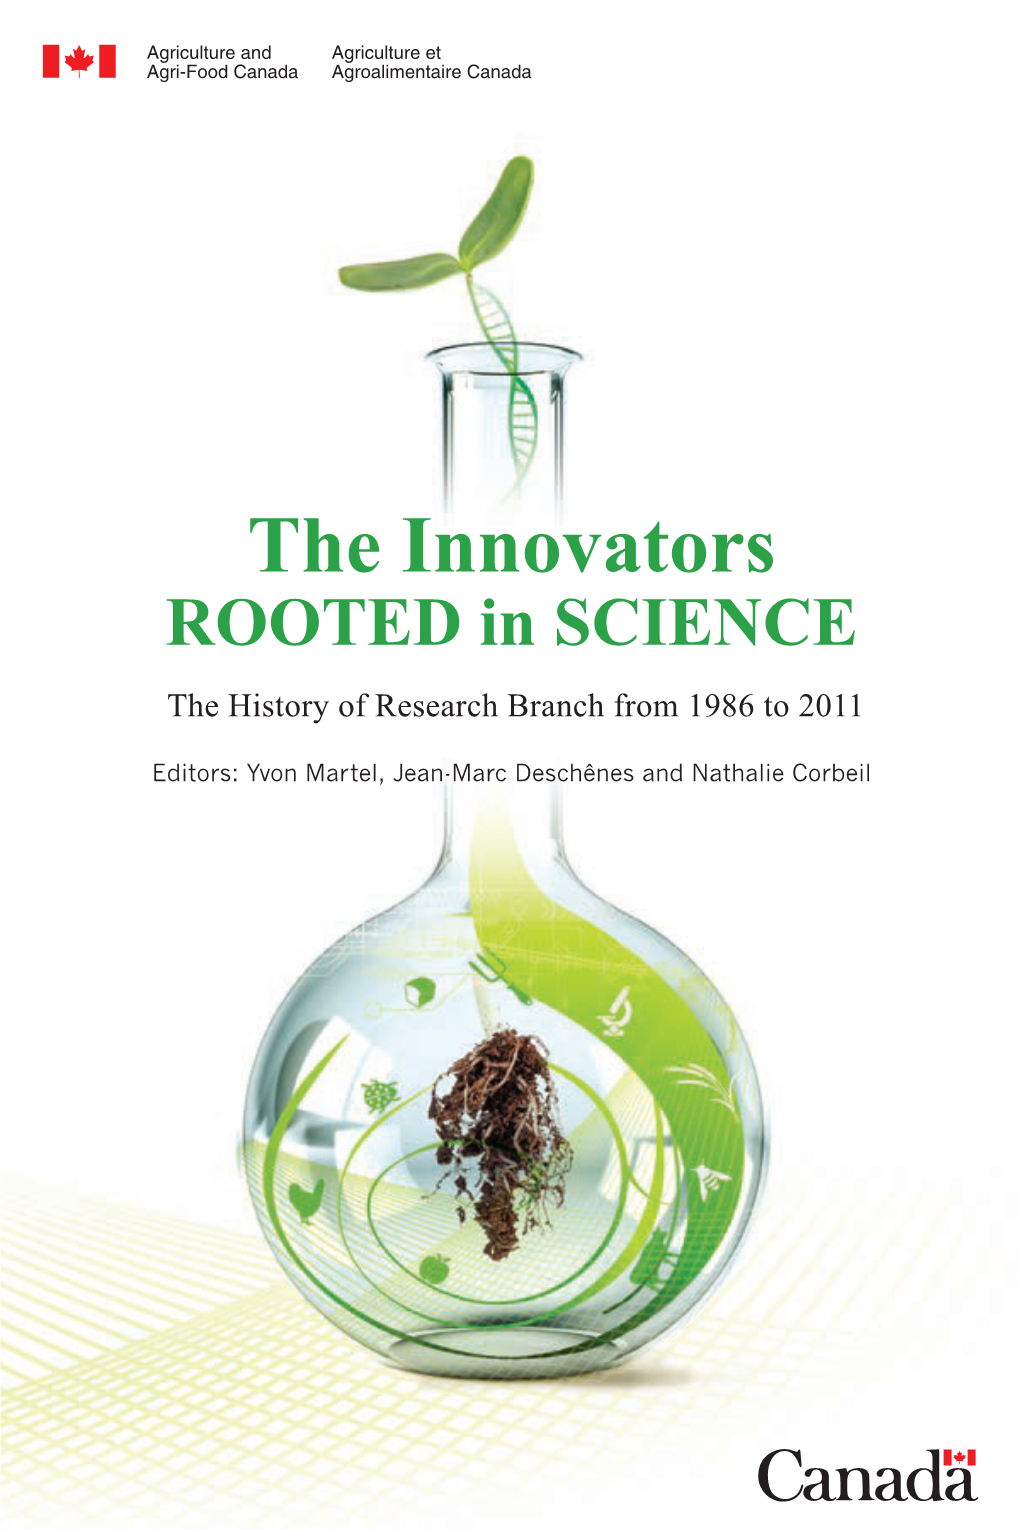 The Innovators Rooted in Science the History of Research Branch from 1986 to 2011